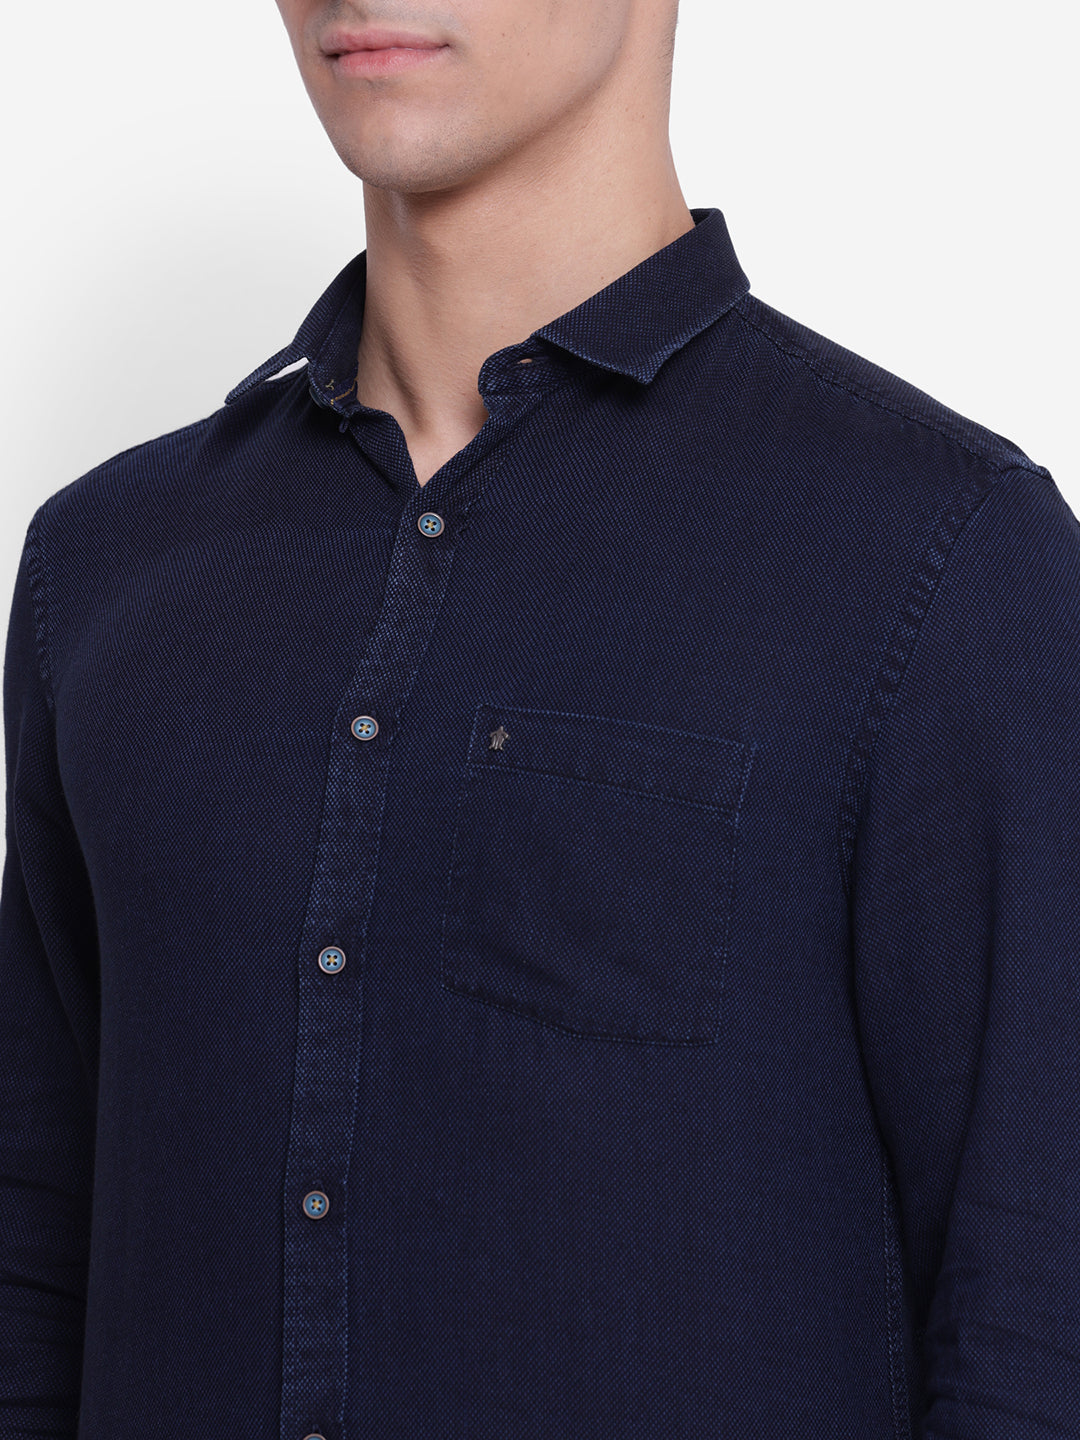 Solid Navy Blue Slim Fit Causal Shirt